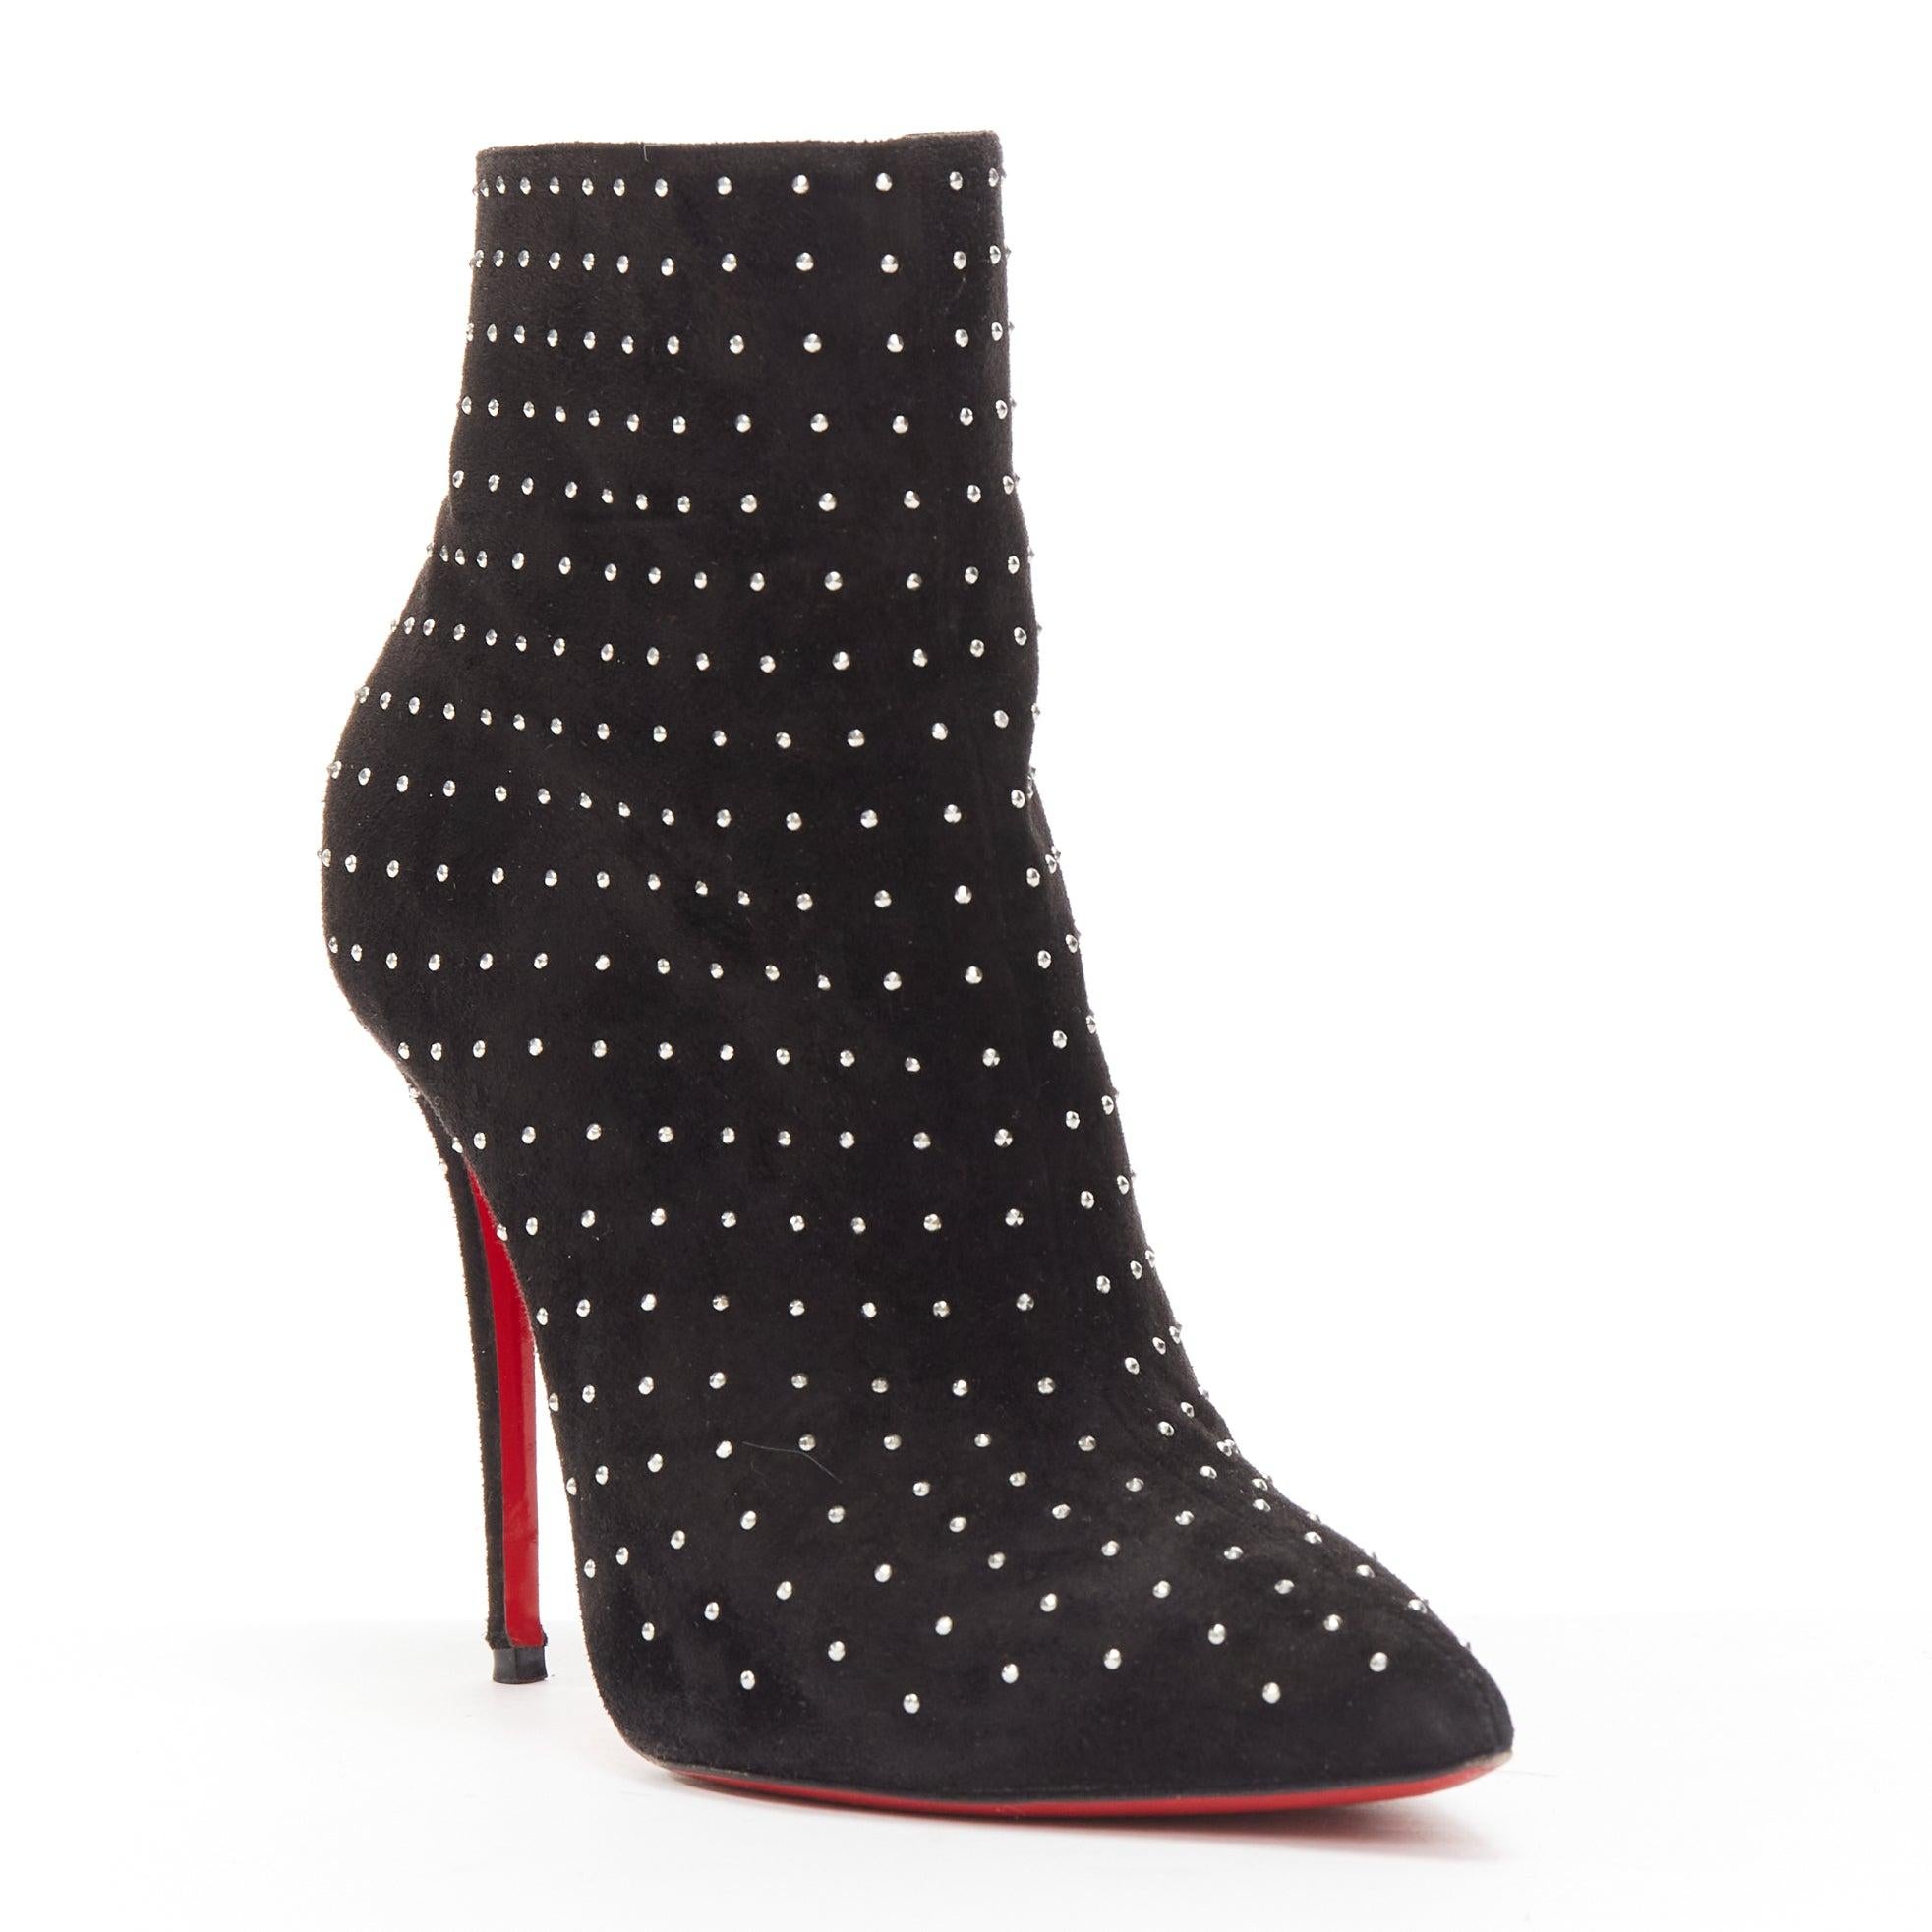 CHRISTIAN LOUBOUTIN So Kate Booty black suede micro stud embellished pointy EU36
Reference: TGAS/D00992
Brand: Christian Louboutin
Model: So Kate Booty
Material: Suede, Metal
Color: Black, Silver
Pattern: Studded
Closure: Zip
Lining: Black